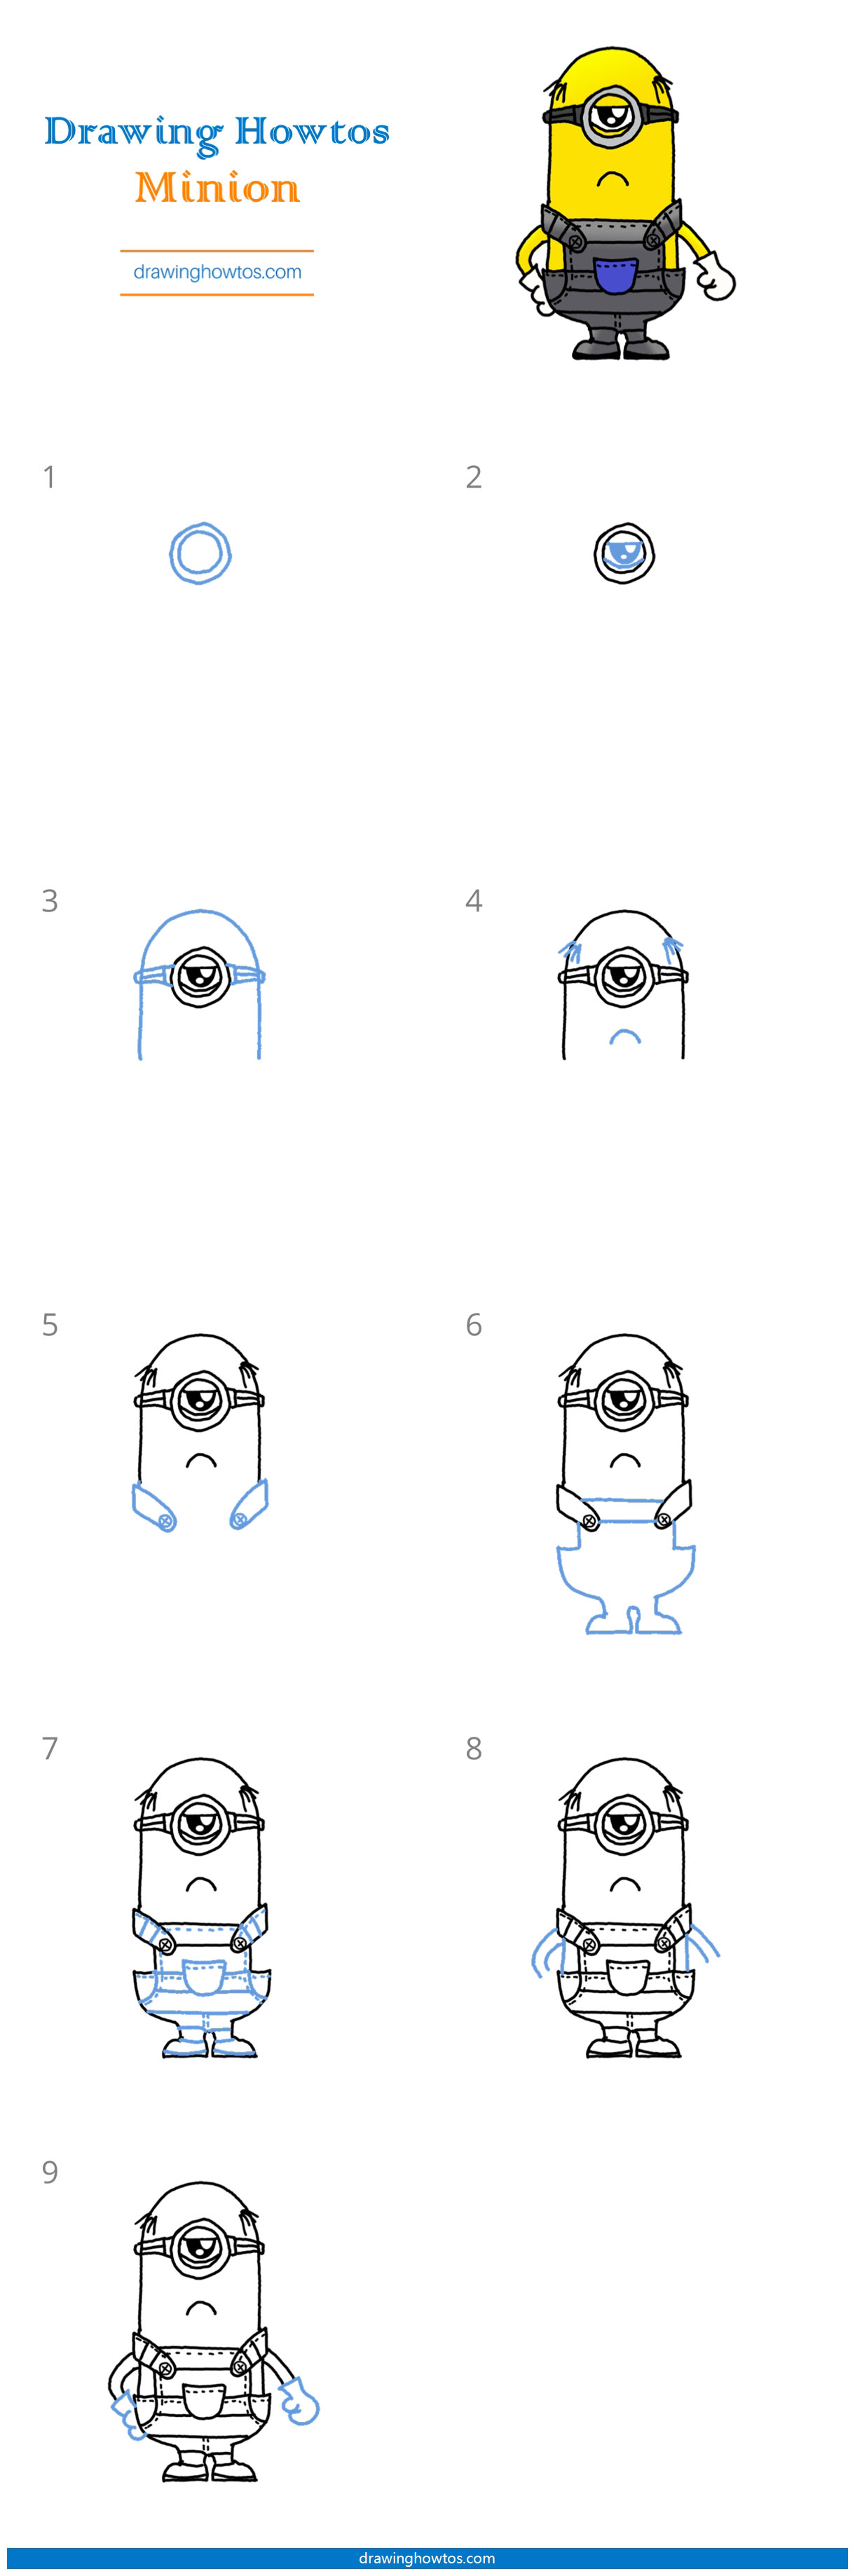 How to Draw a Minion - Step by Step Easy Drawing Guides - Drawing Howtos